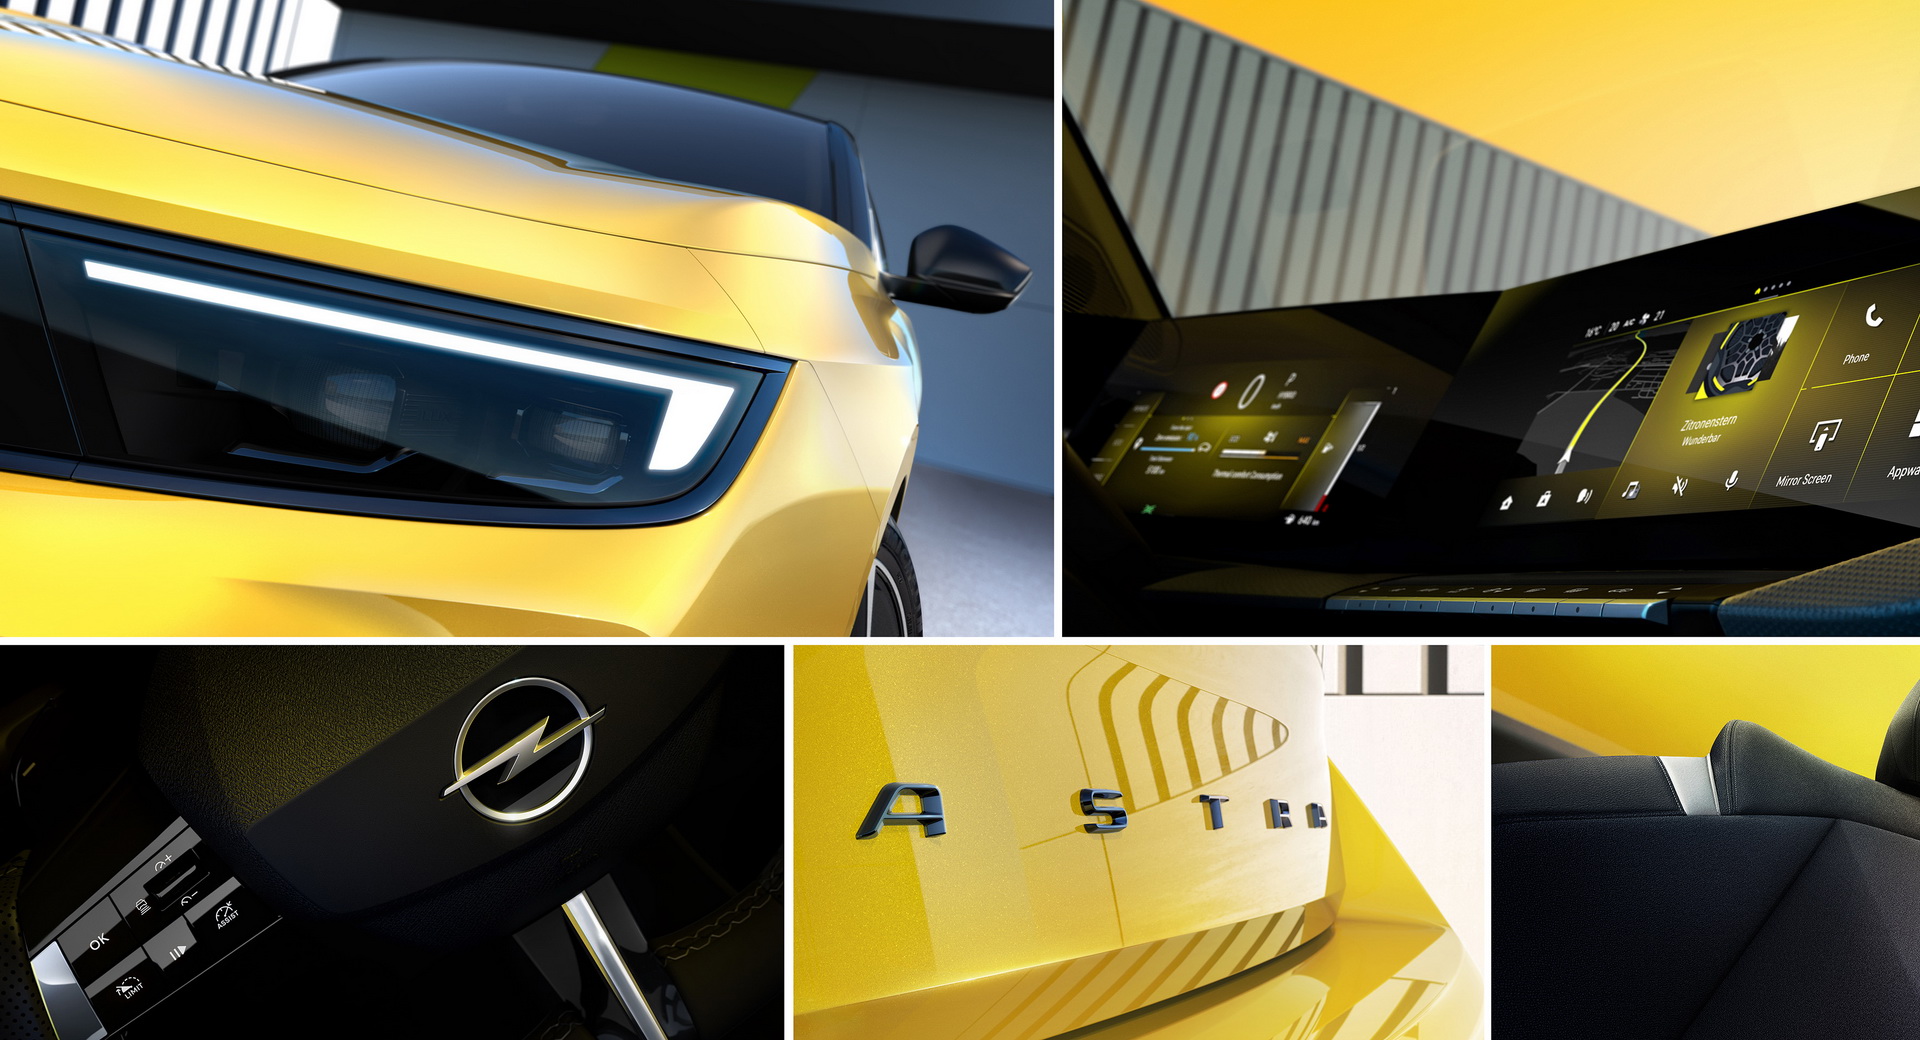 2022 Opel Astra Shows Its Face And Digital Cockpit In New Teaser